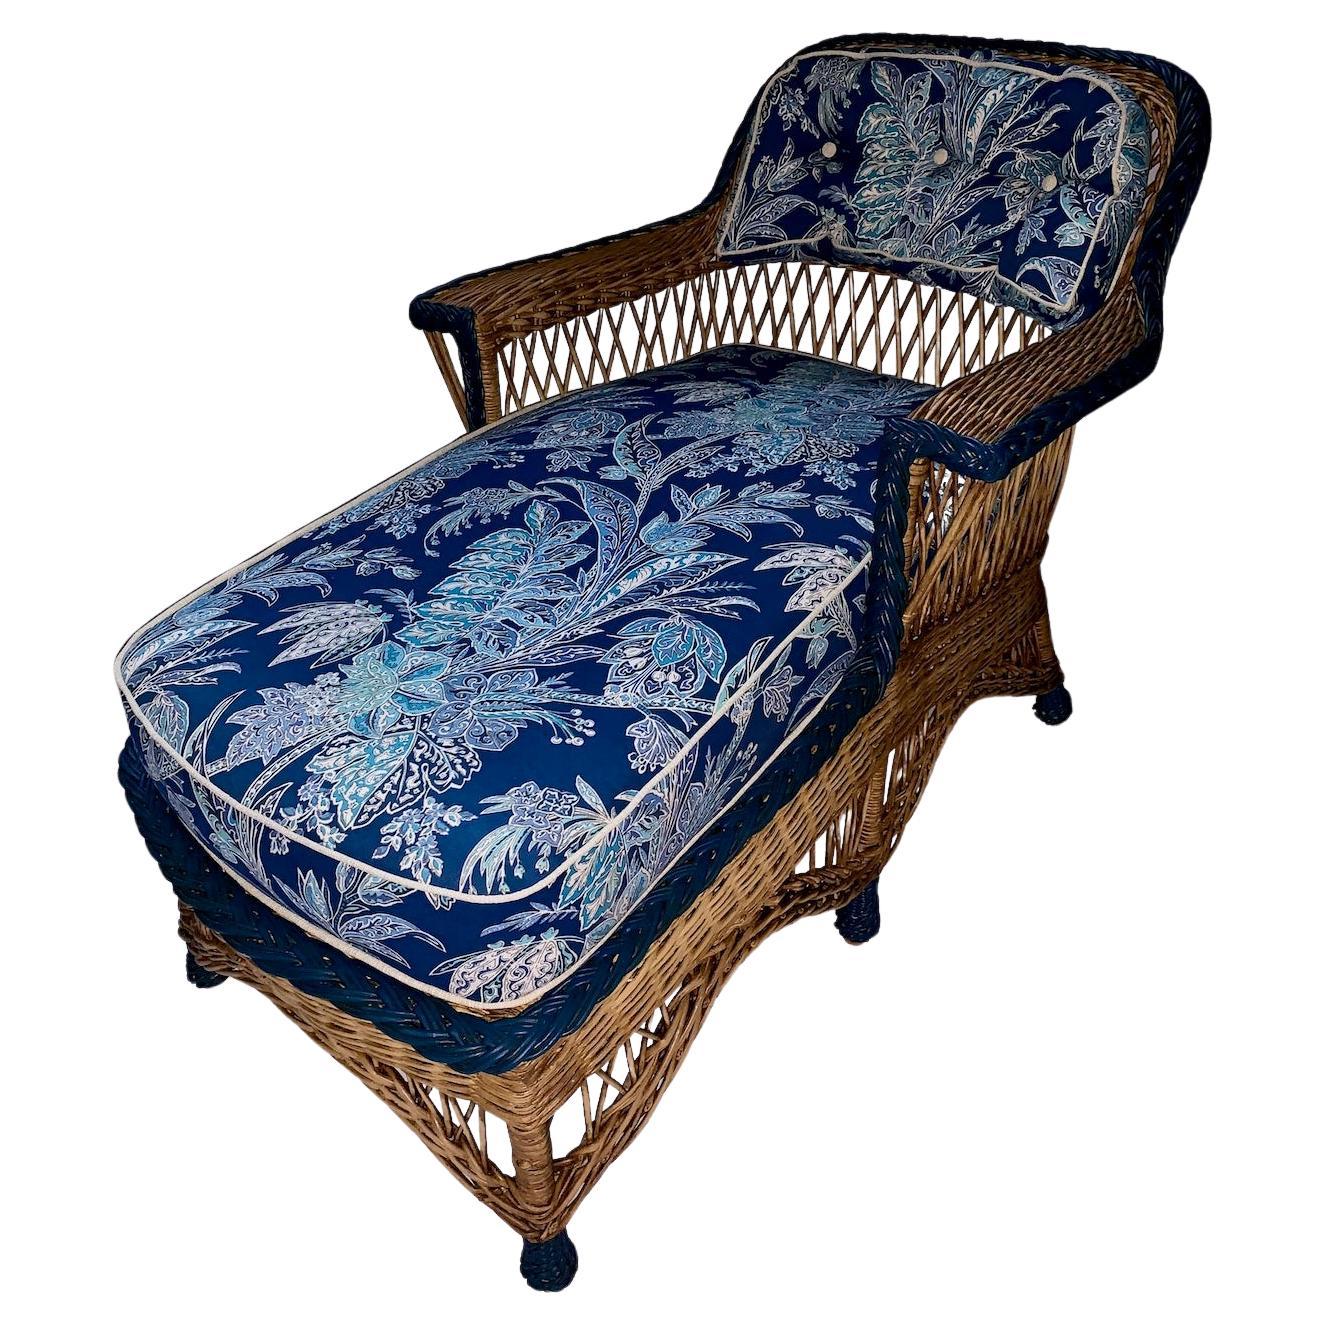 A Wicker Bar Harbor Style Chaise Lounge, Natural Finish with Navy Blue Trim For Sale